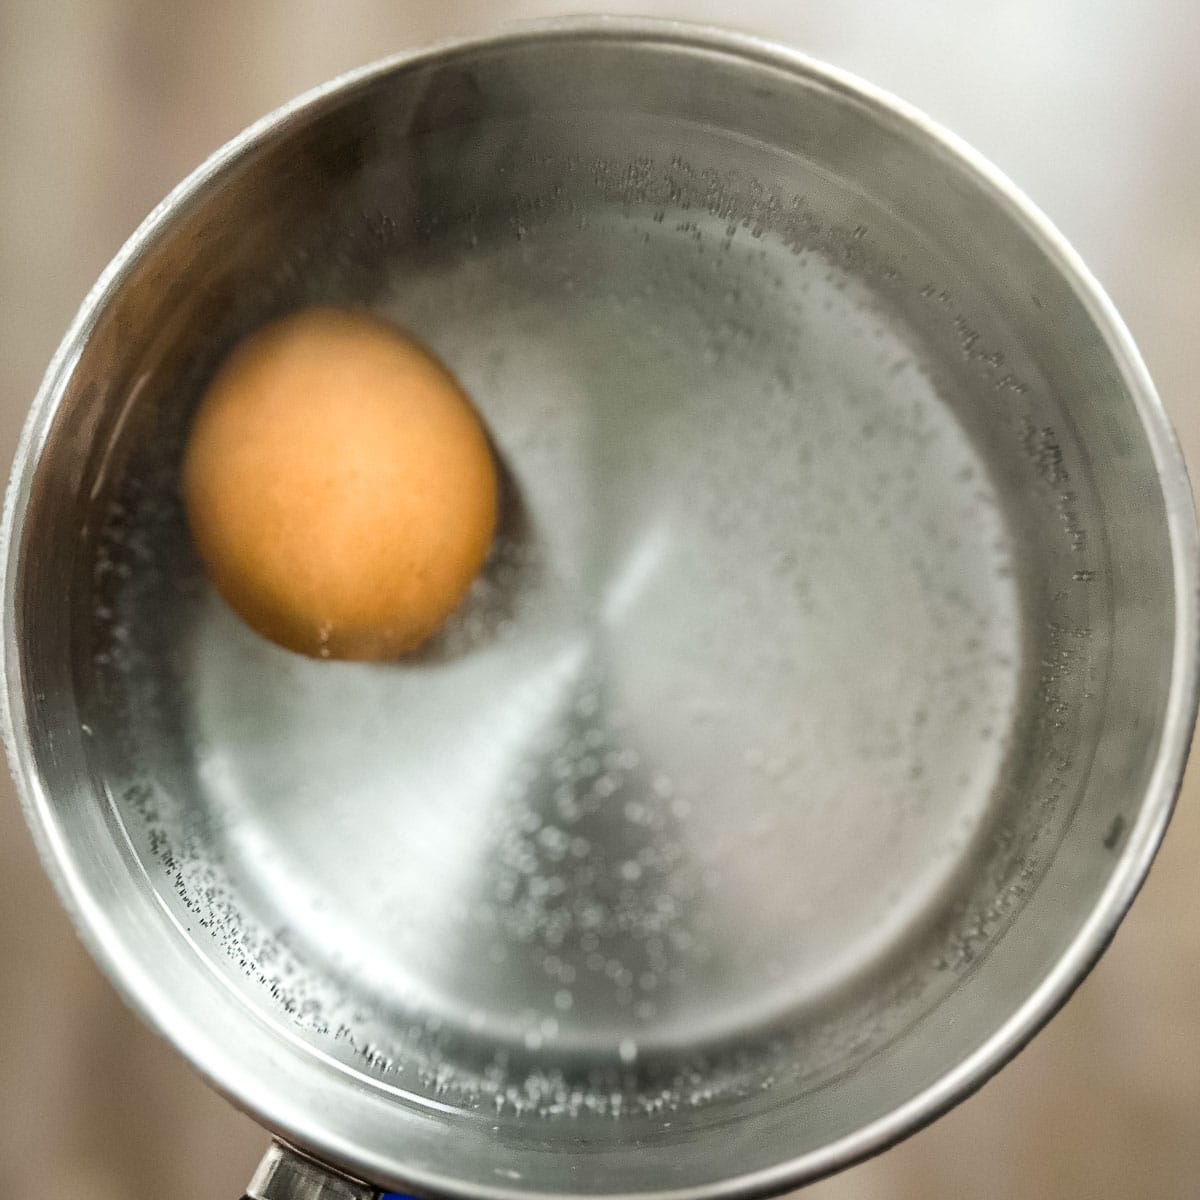 a brown egg is shown in a pot with simmering water.